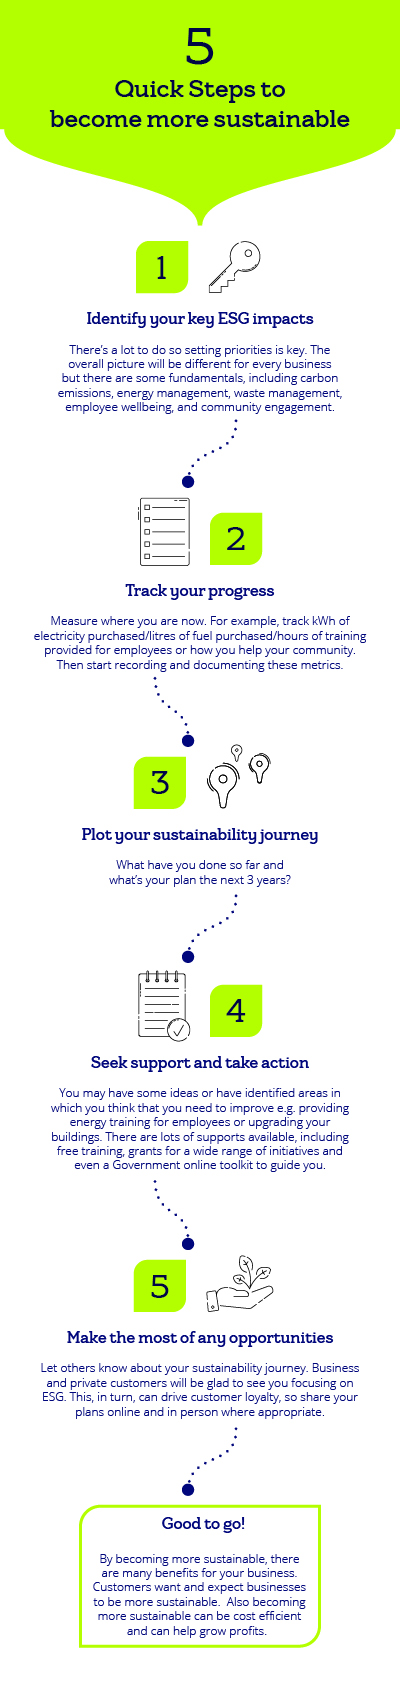 5 Quick Steps to Become More Sustainable